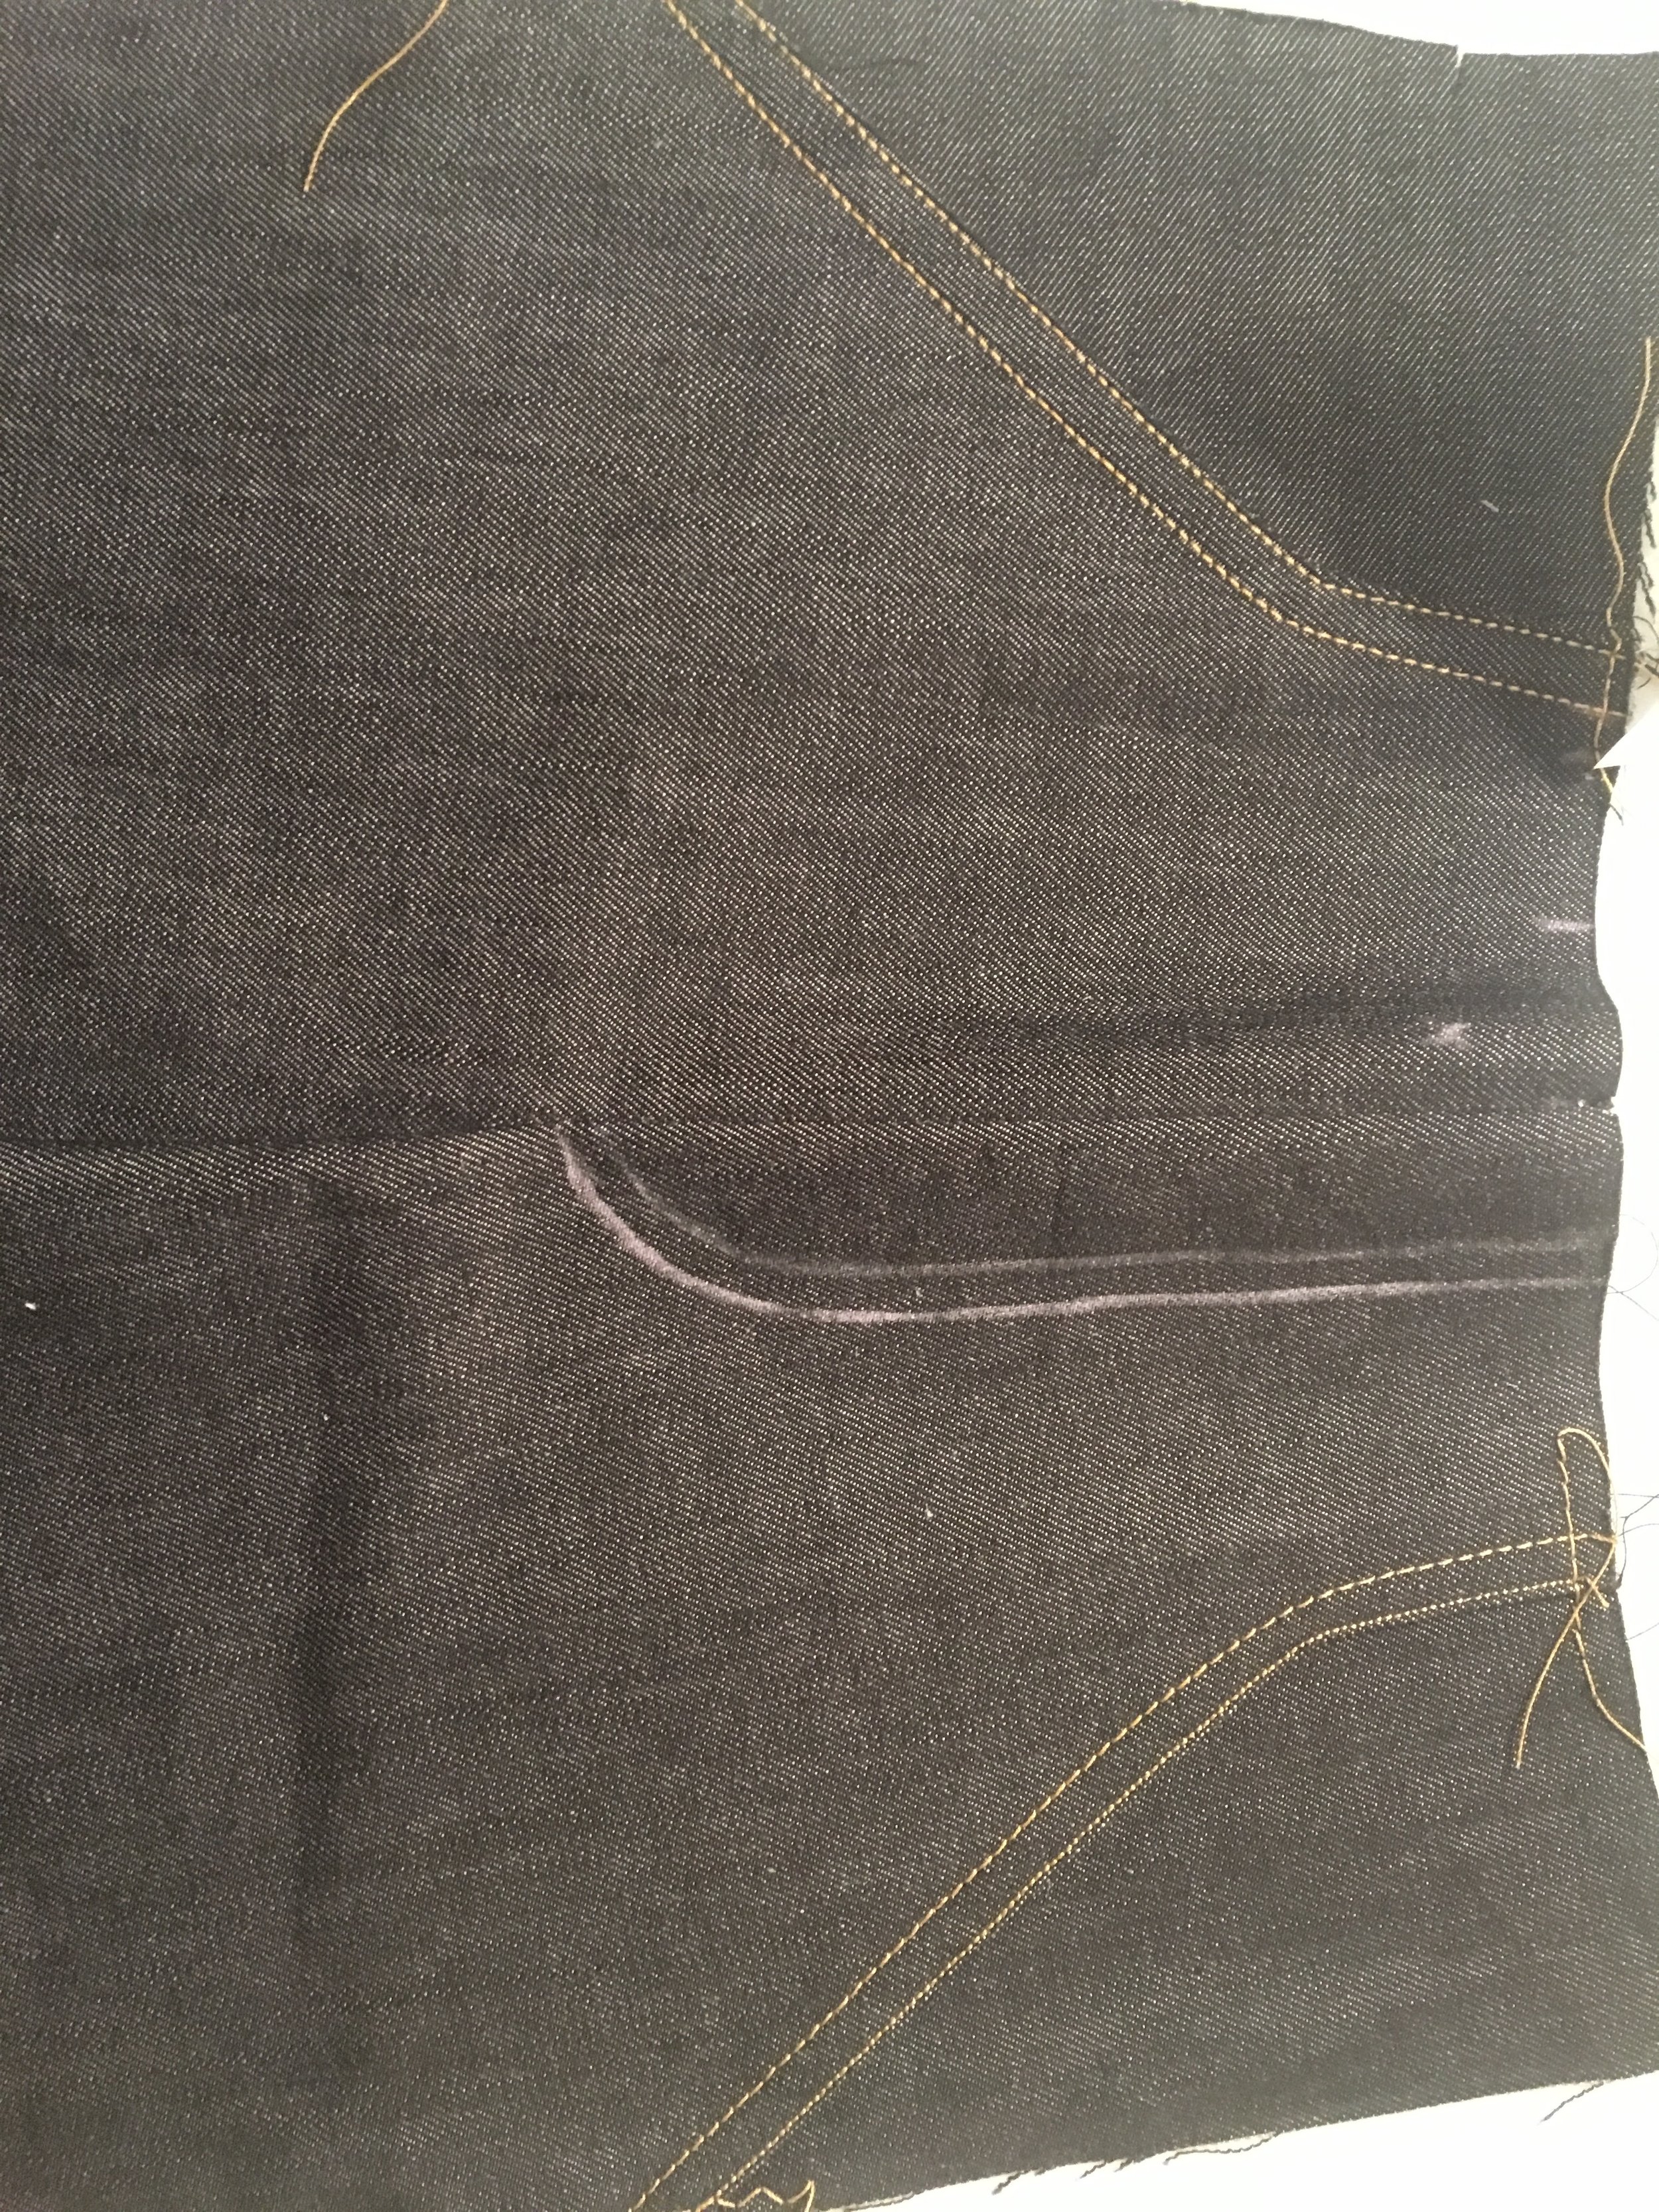 assembled pants front, chalked for fly topstitching guides